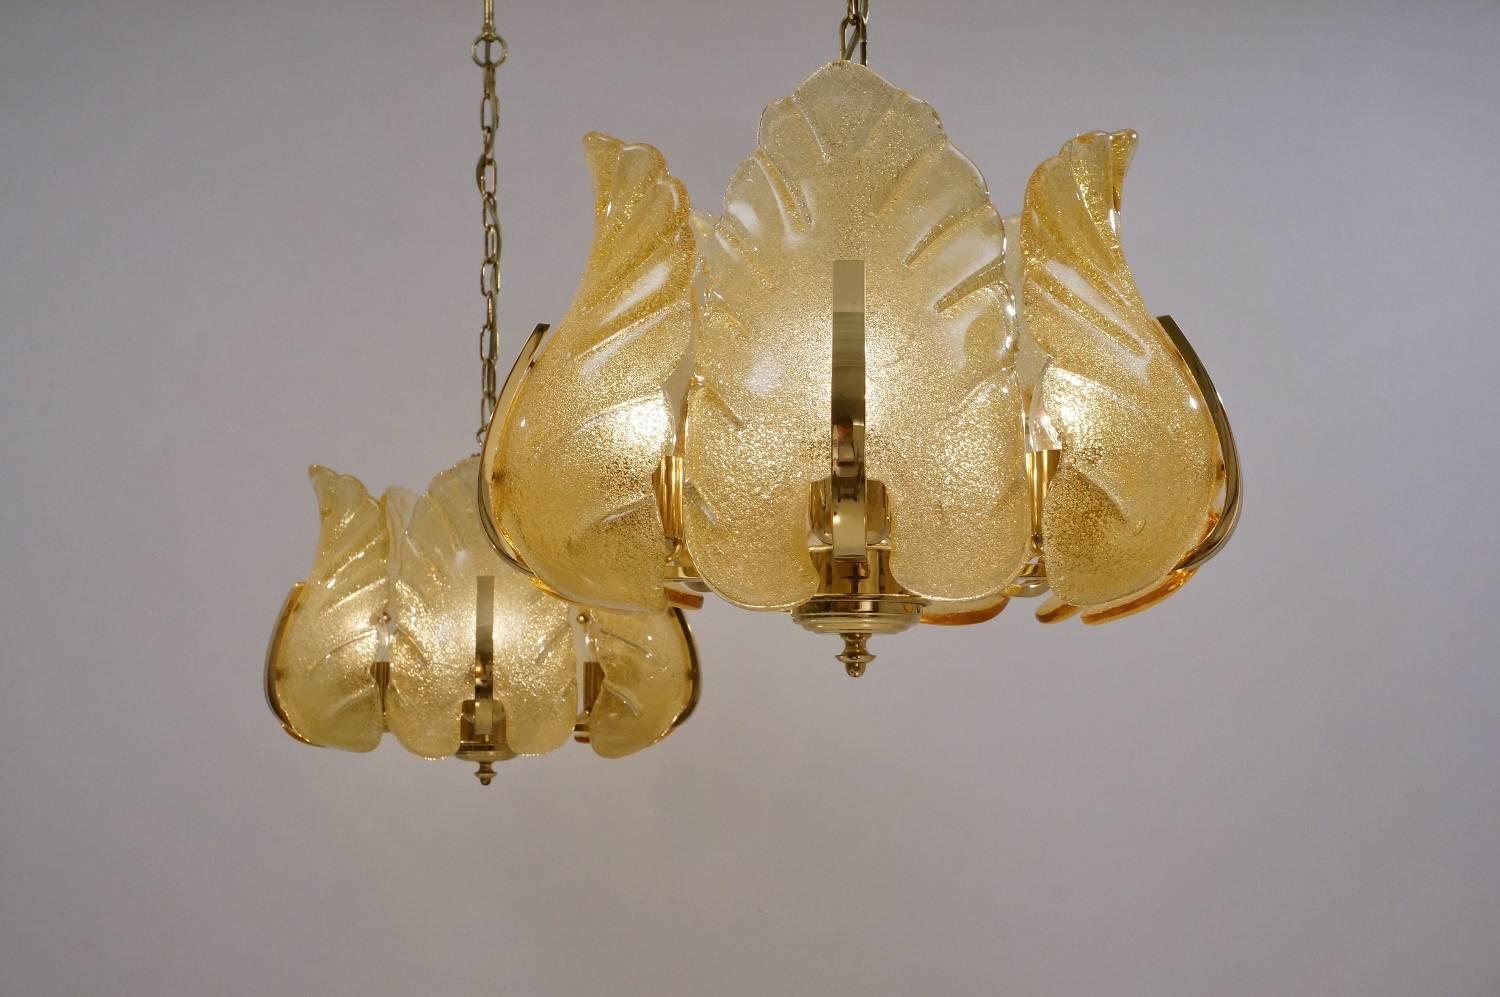 Carl Fagerlund Orrefors chandeliers, a matching pair, gold glass leaves on a brass frame, five lights, circa 1960s, Sweden.

This pair of chandeliers have been thoroughly cleaned respecting the vintage patina; both newly rewired and earthed, in